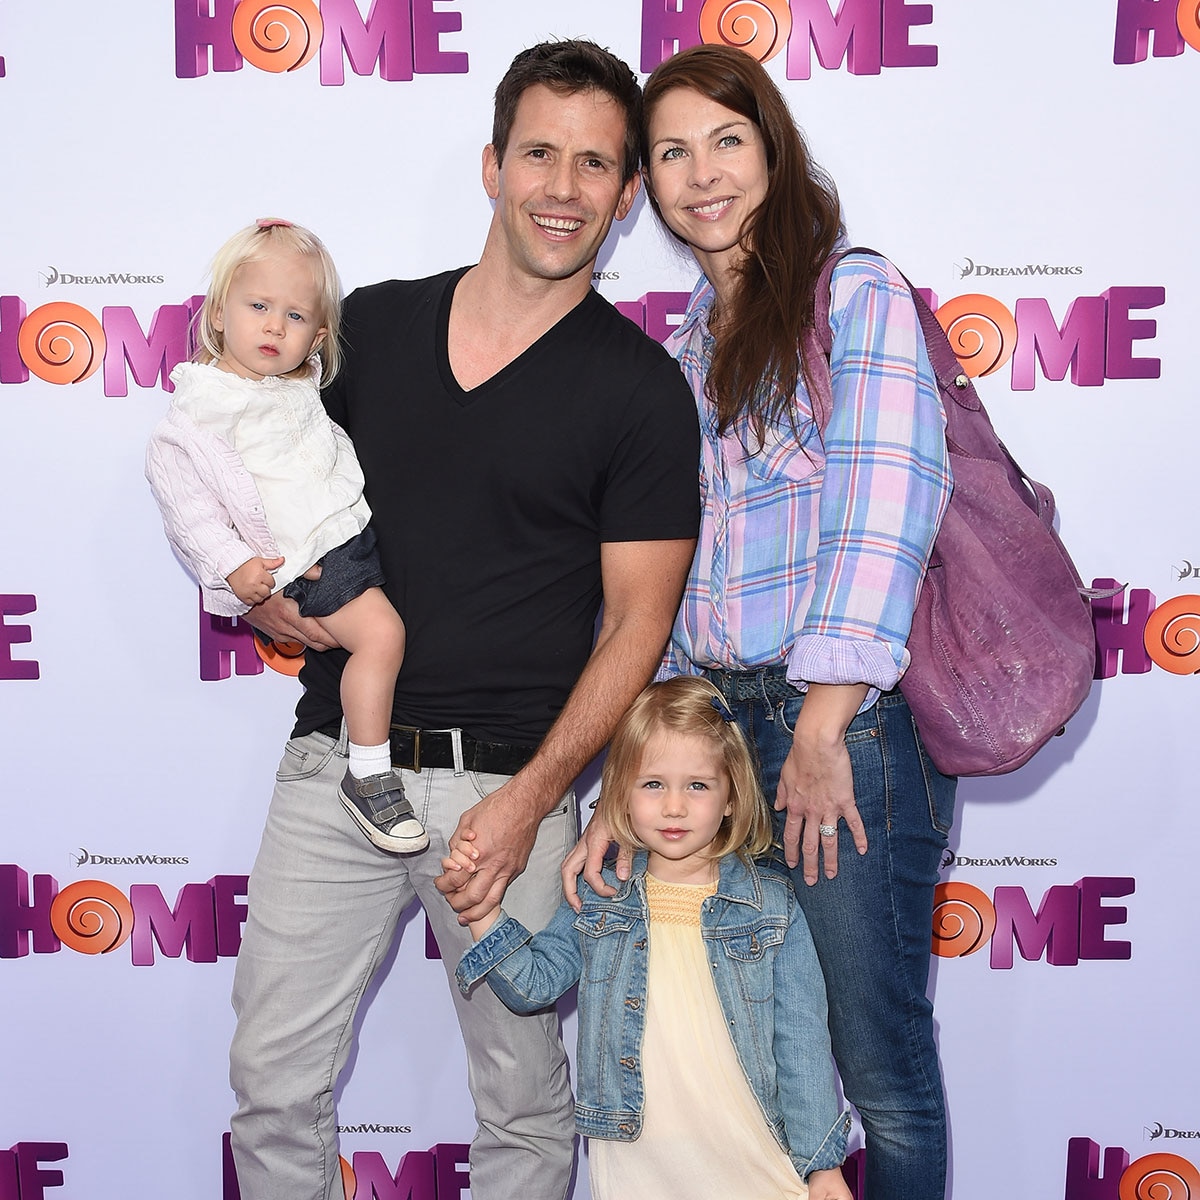 Christian Oliver, Wife, Jessica Klepser, Daughters, Home Movie Premiere, 2015